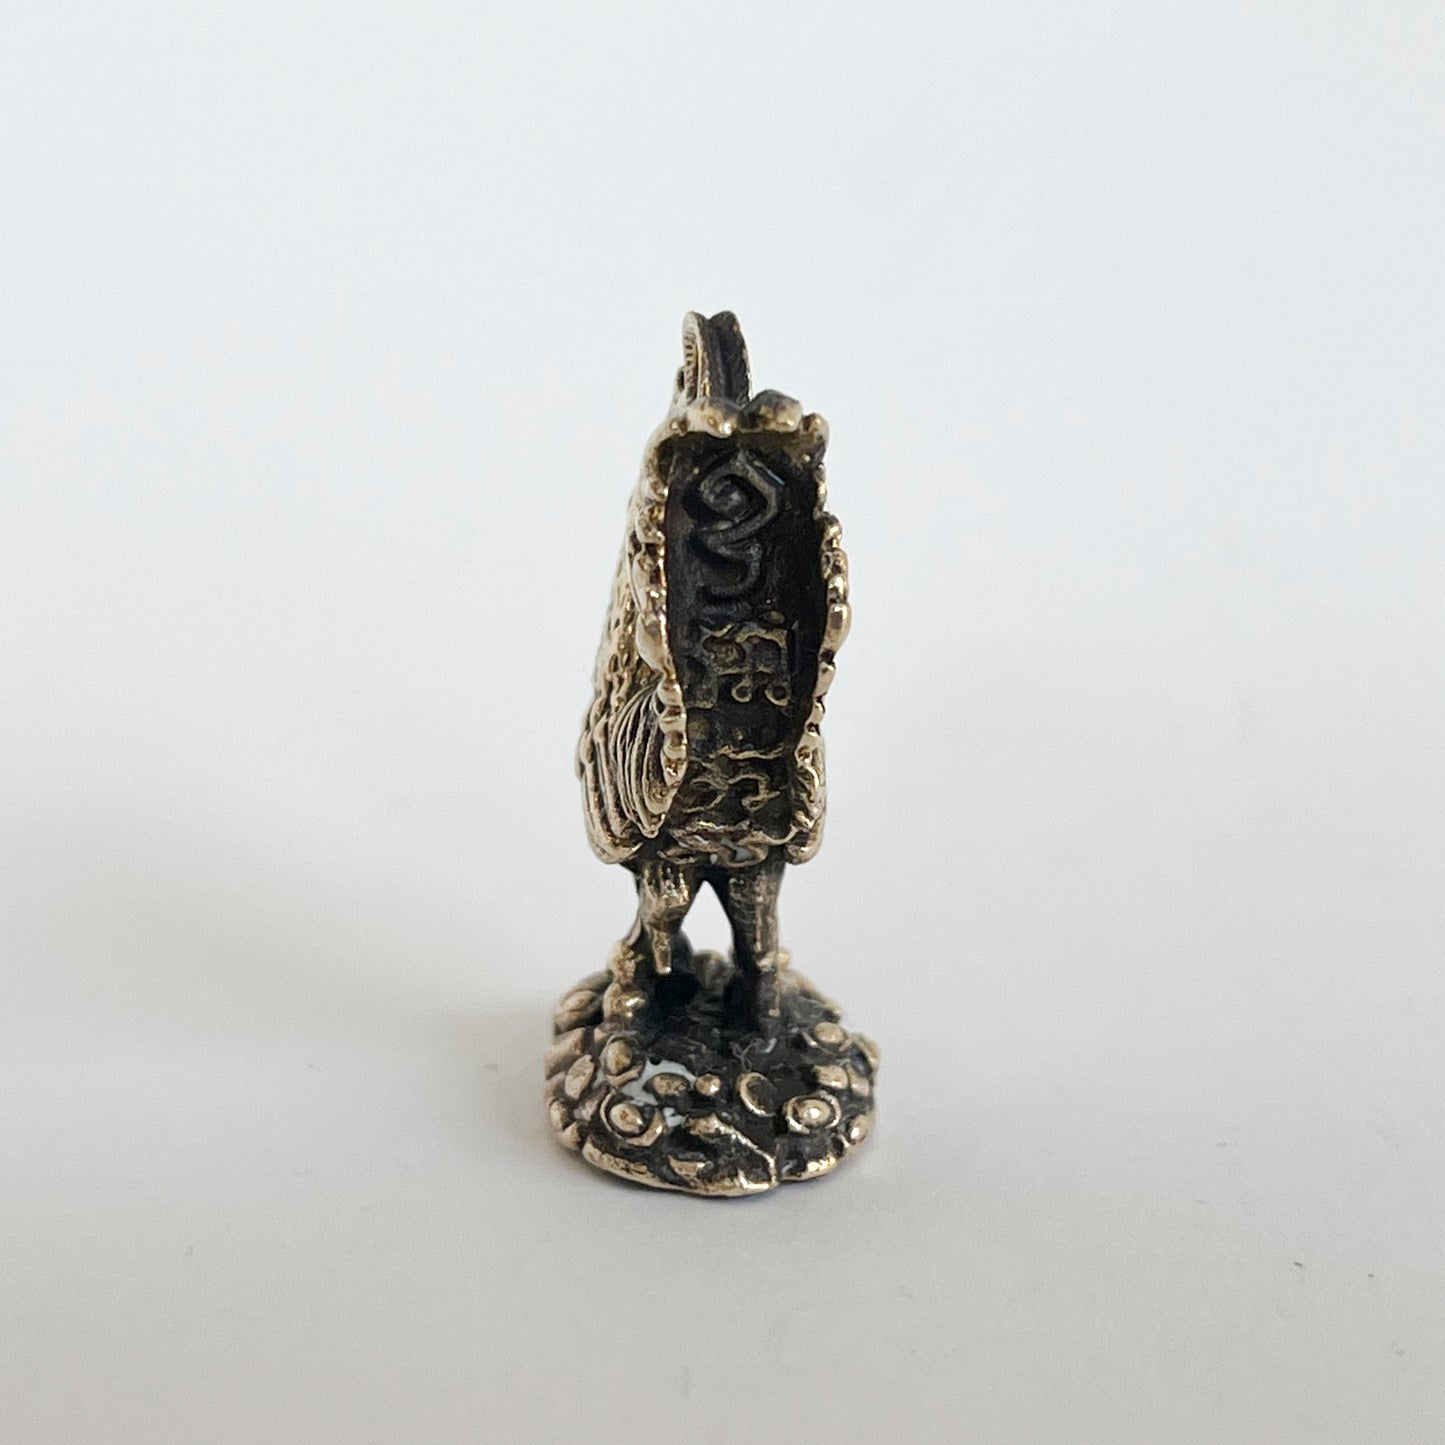 Rooster “Gai Tor” Protective Pendant